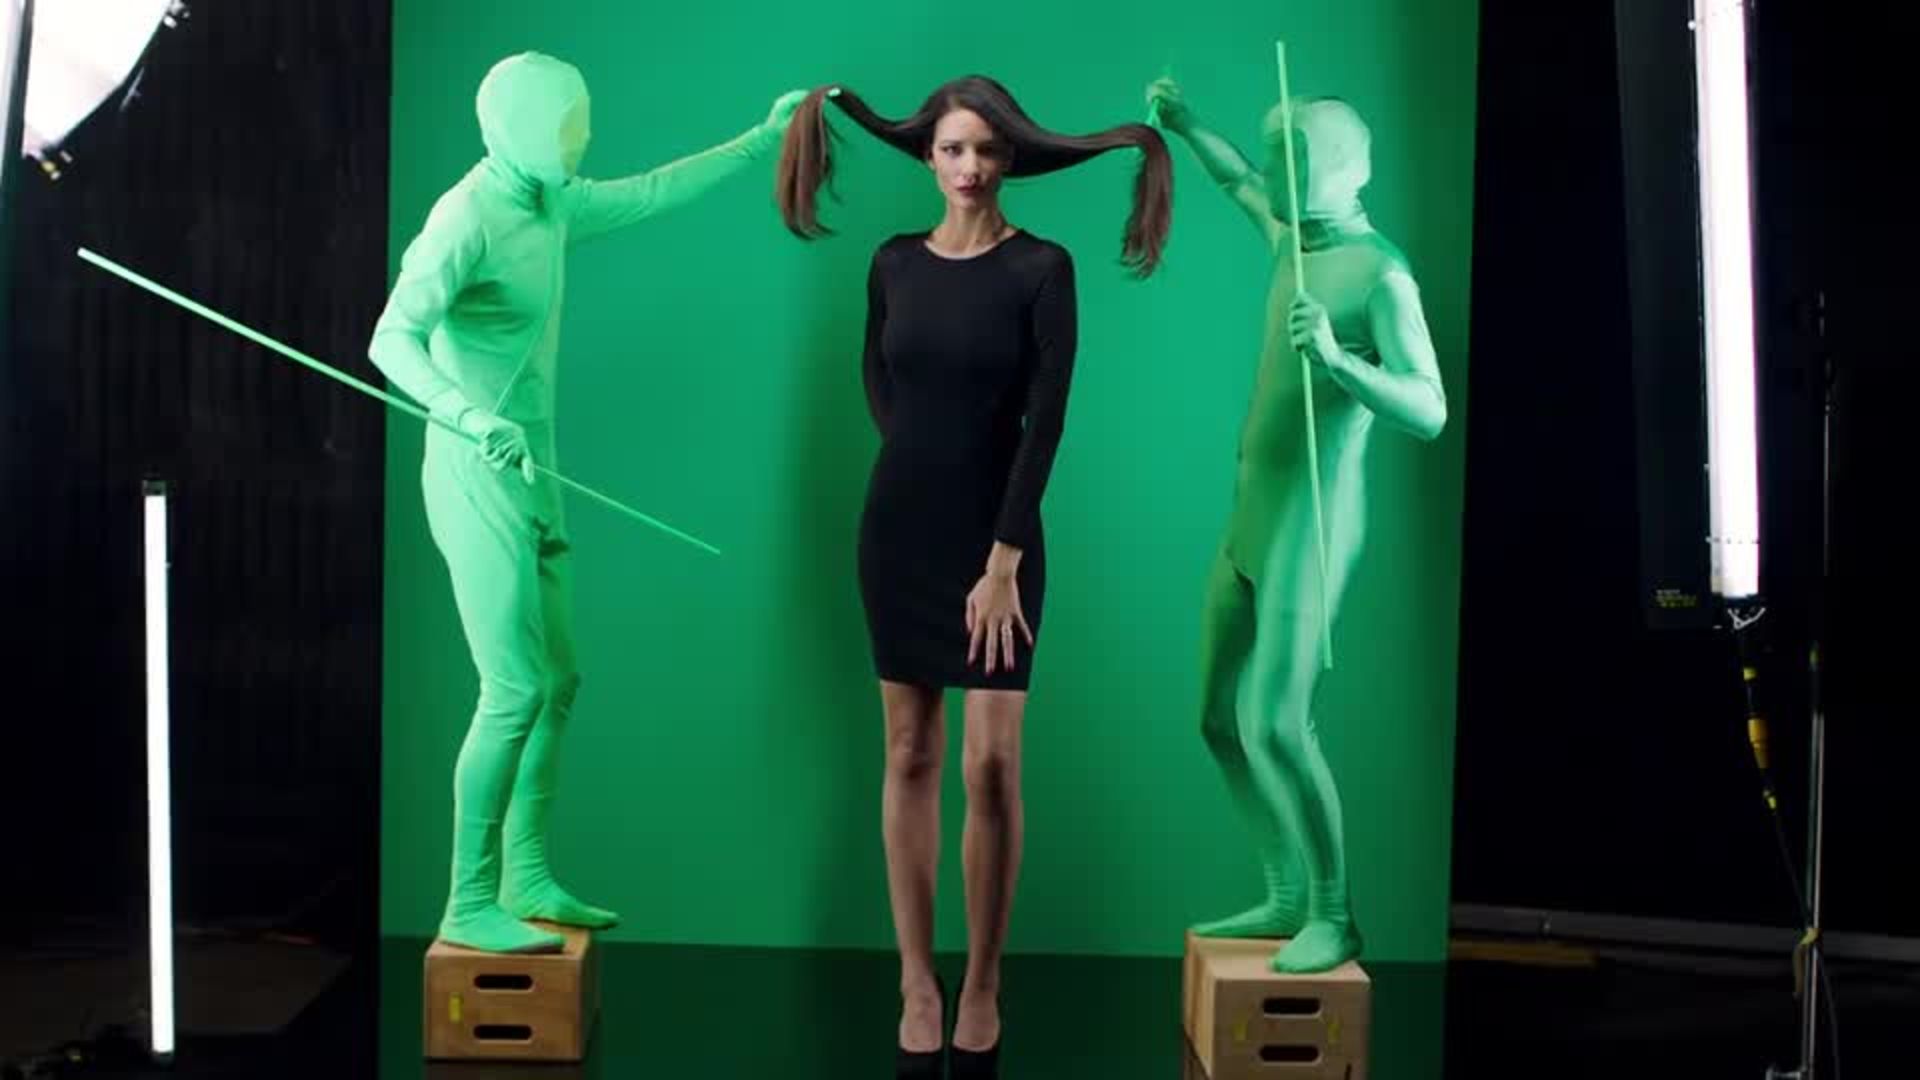 Slow Motion Woman Airdrying Blonde Hair In Front Of Green Screen 1920x1080  Hd Footage Hair Blowdrying Of Blond Female Chroma Key Greenscreen 1080p  Fullhd Slowmo Video Stock Video  Download Video Clip